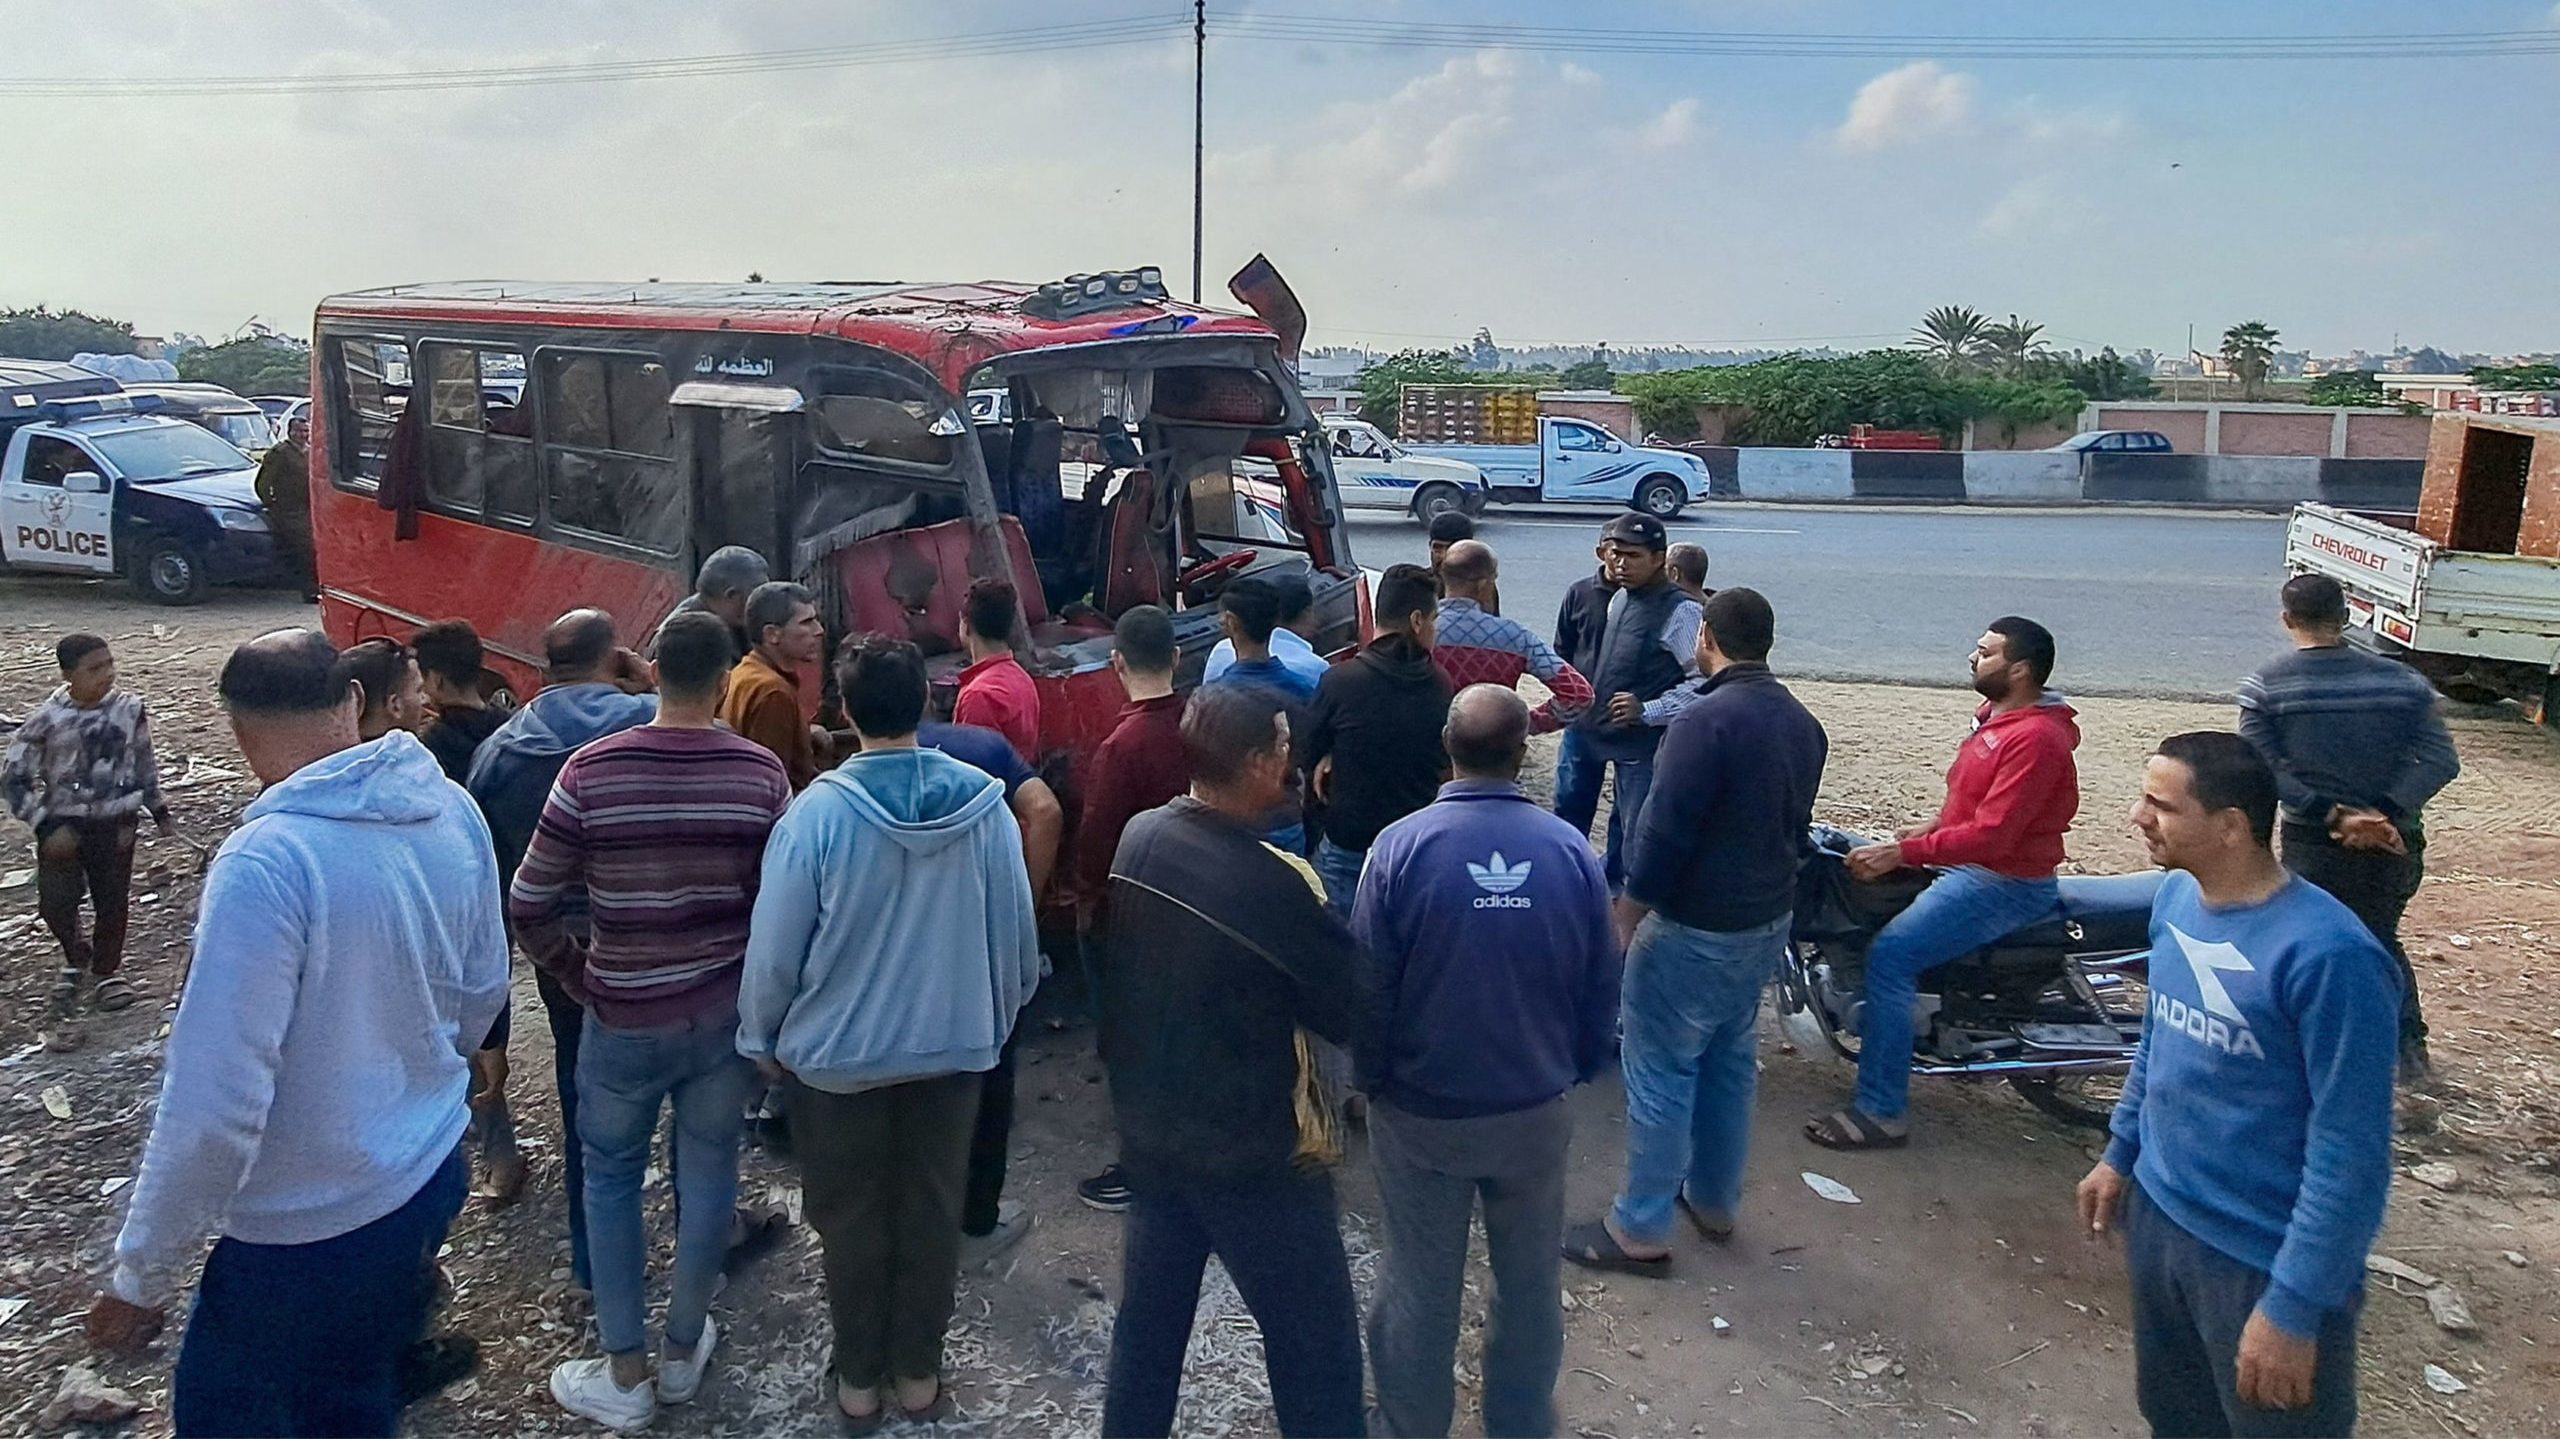 Minibus Plunges Into Canal in Northern Egypt, Killing 19